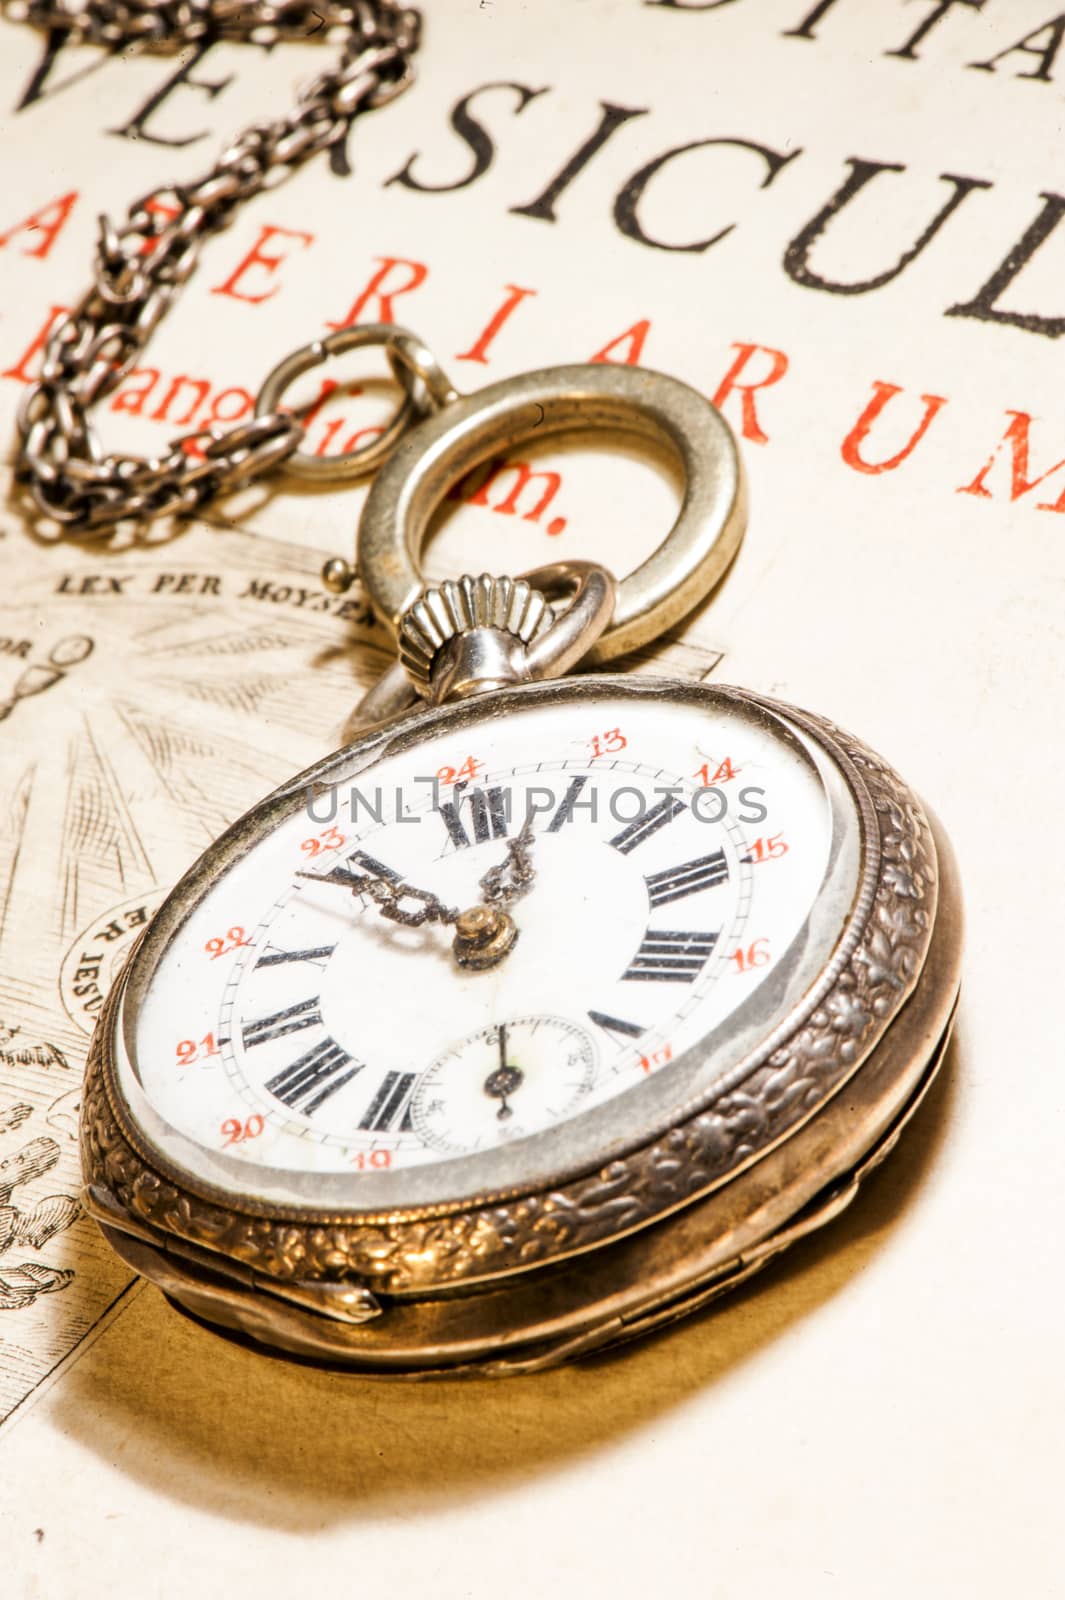 antique pocket watch on ancient Bible into Latin